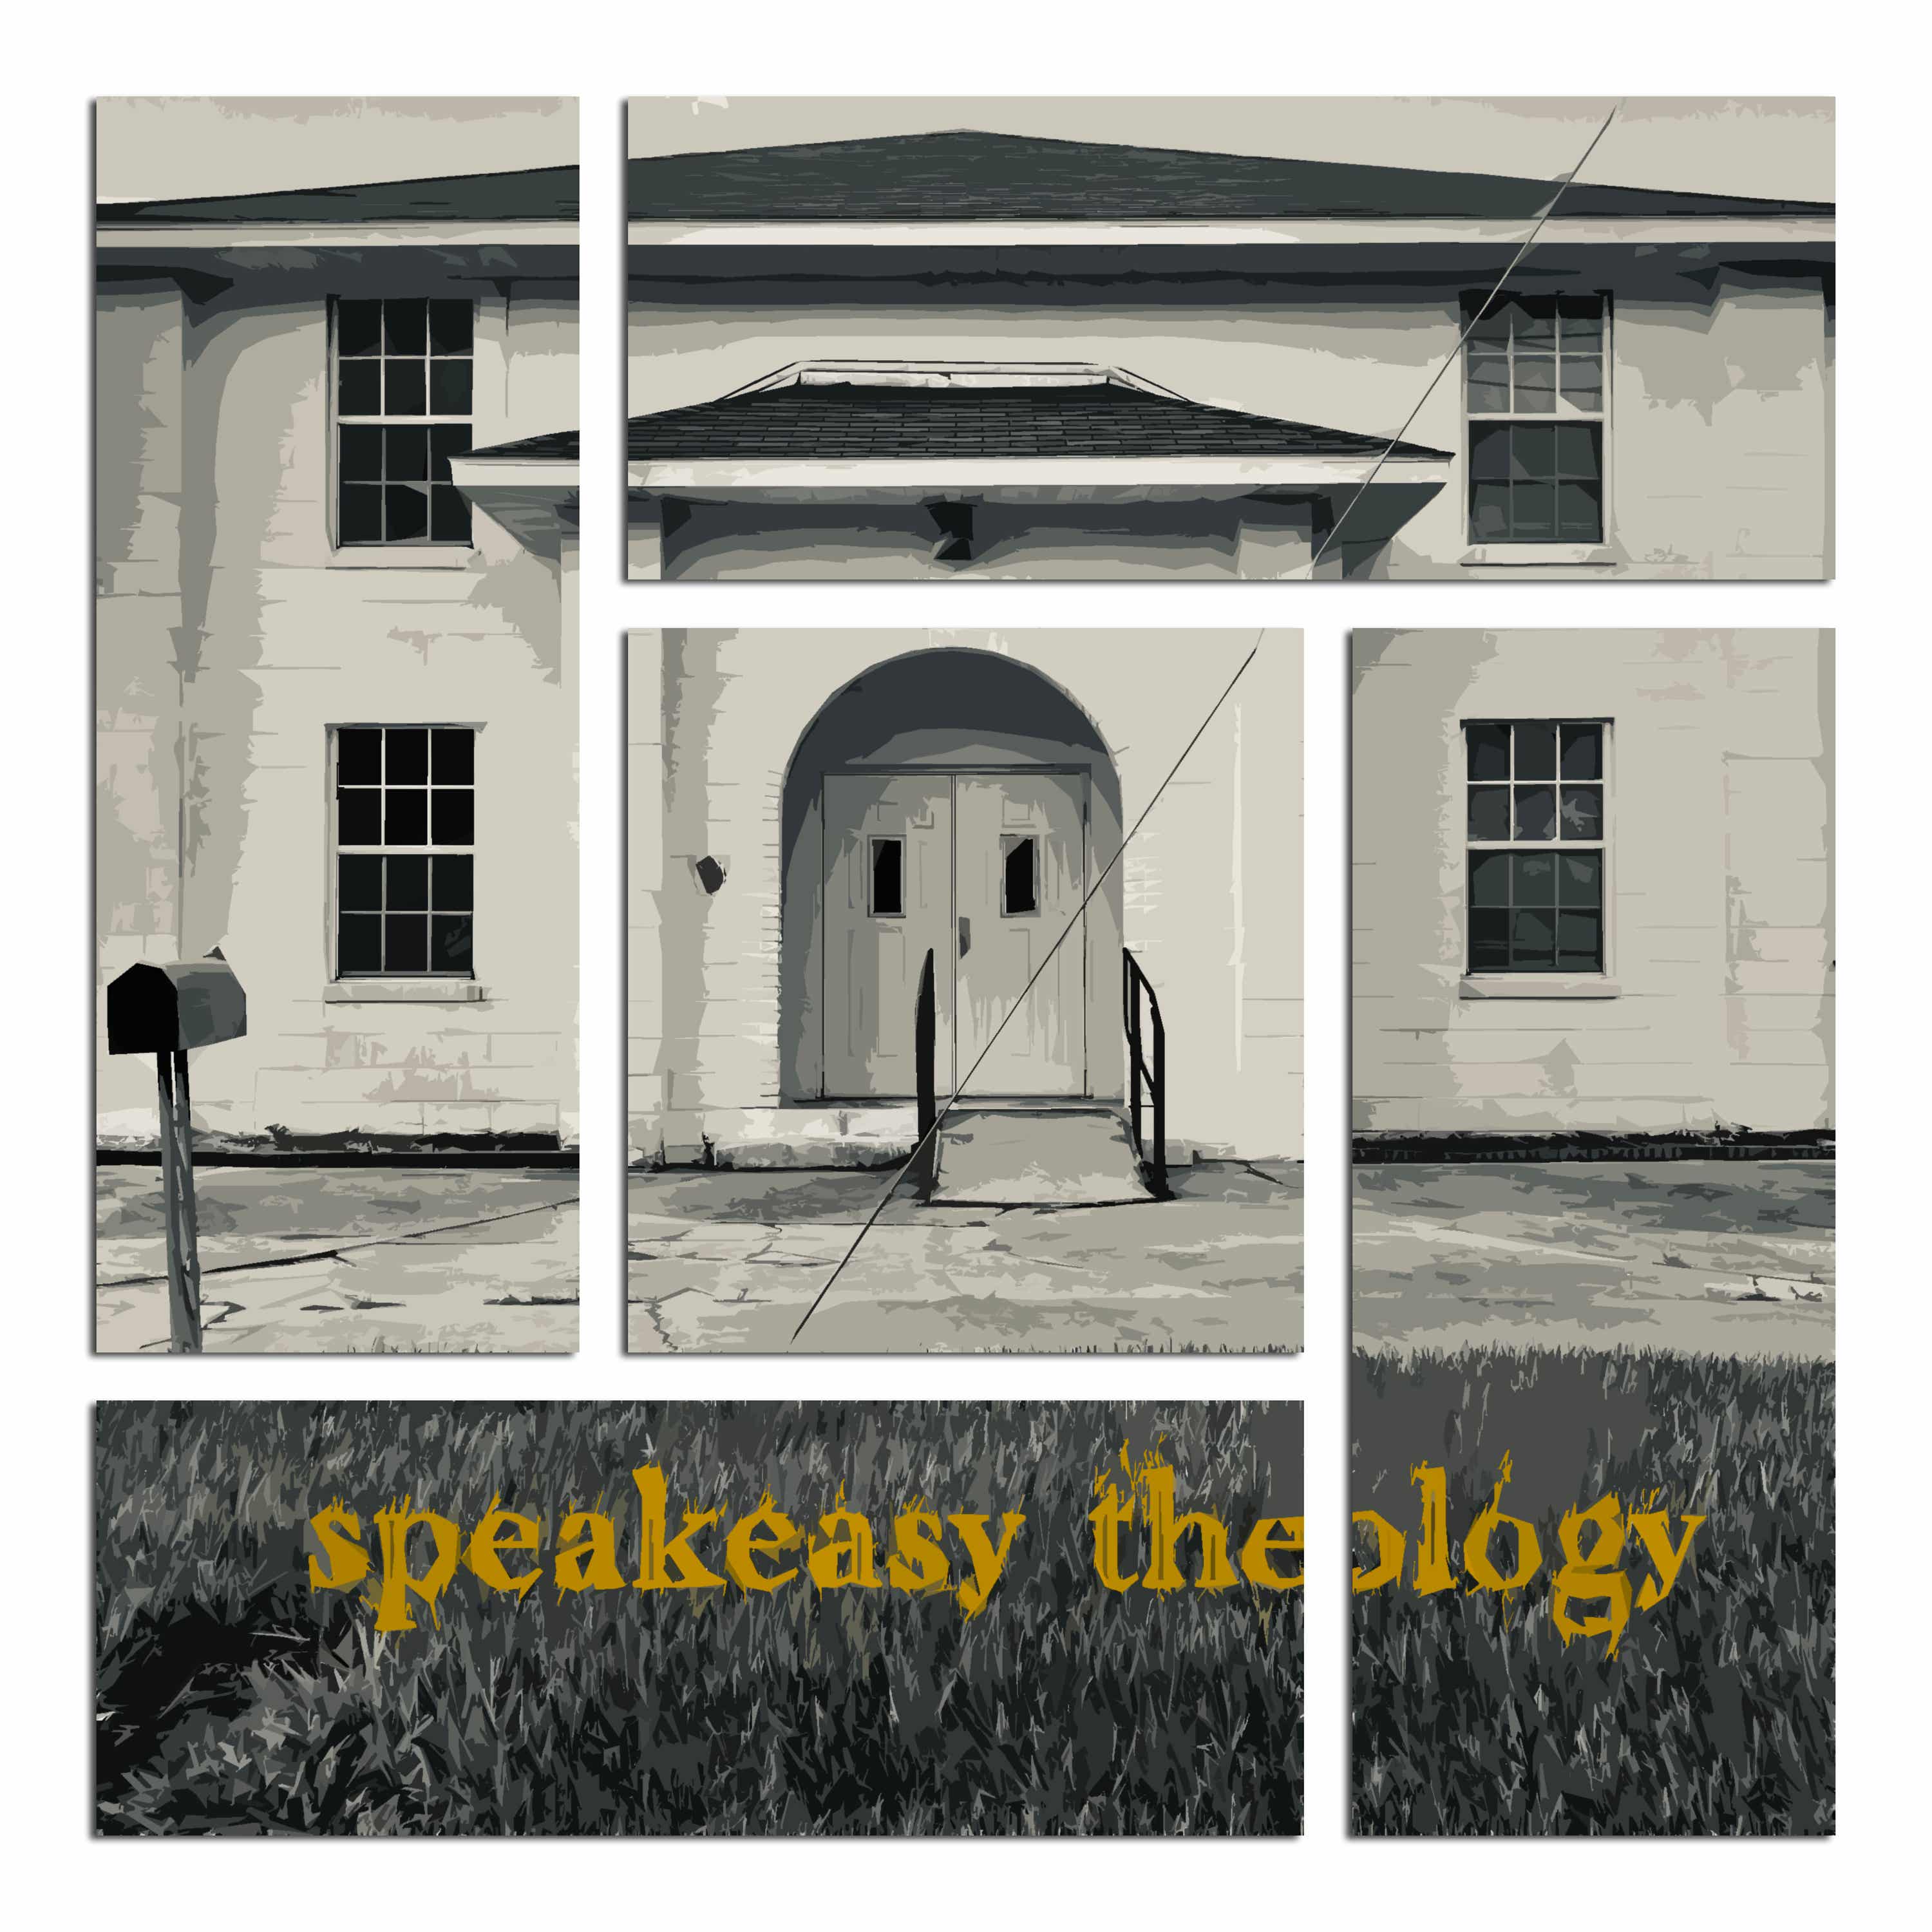 Speakeasy Theology  (private feed for csadosky7@gmail.com)